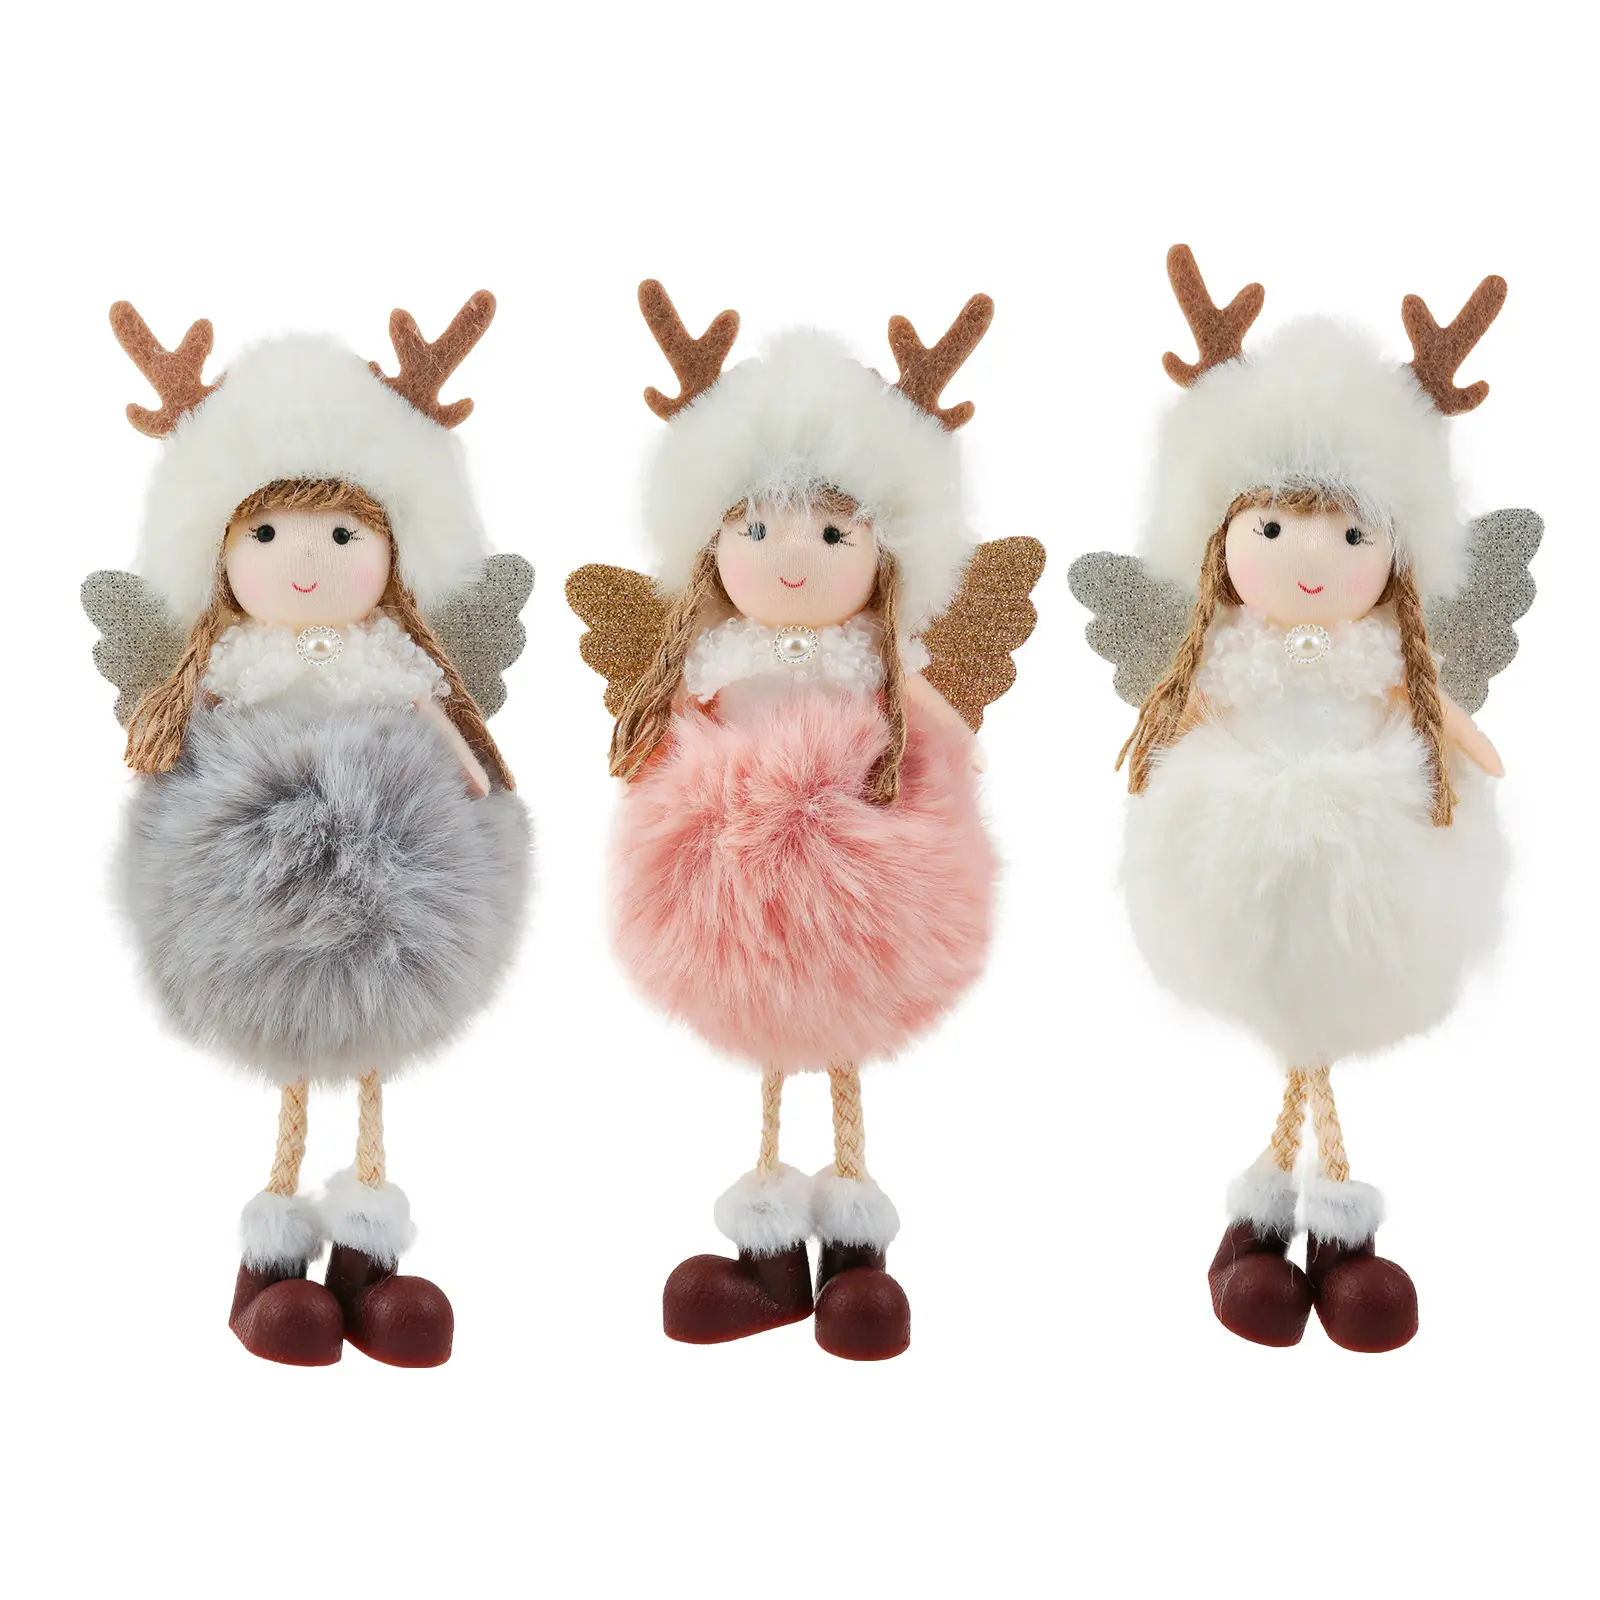 New Cross Border Christmas Angel Pendant With Plush Antlers And Cute Doll Gift Christmas Tree Pendant